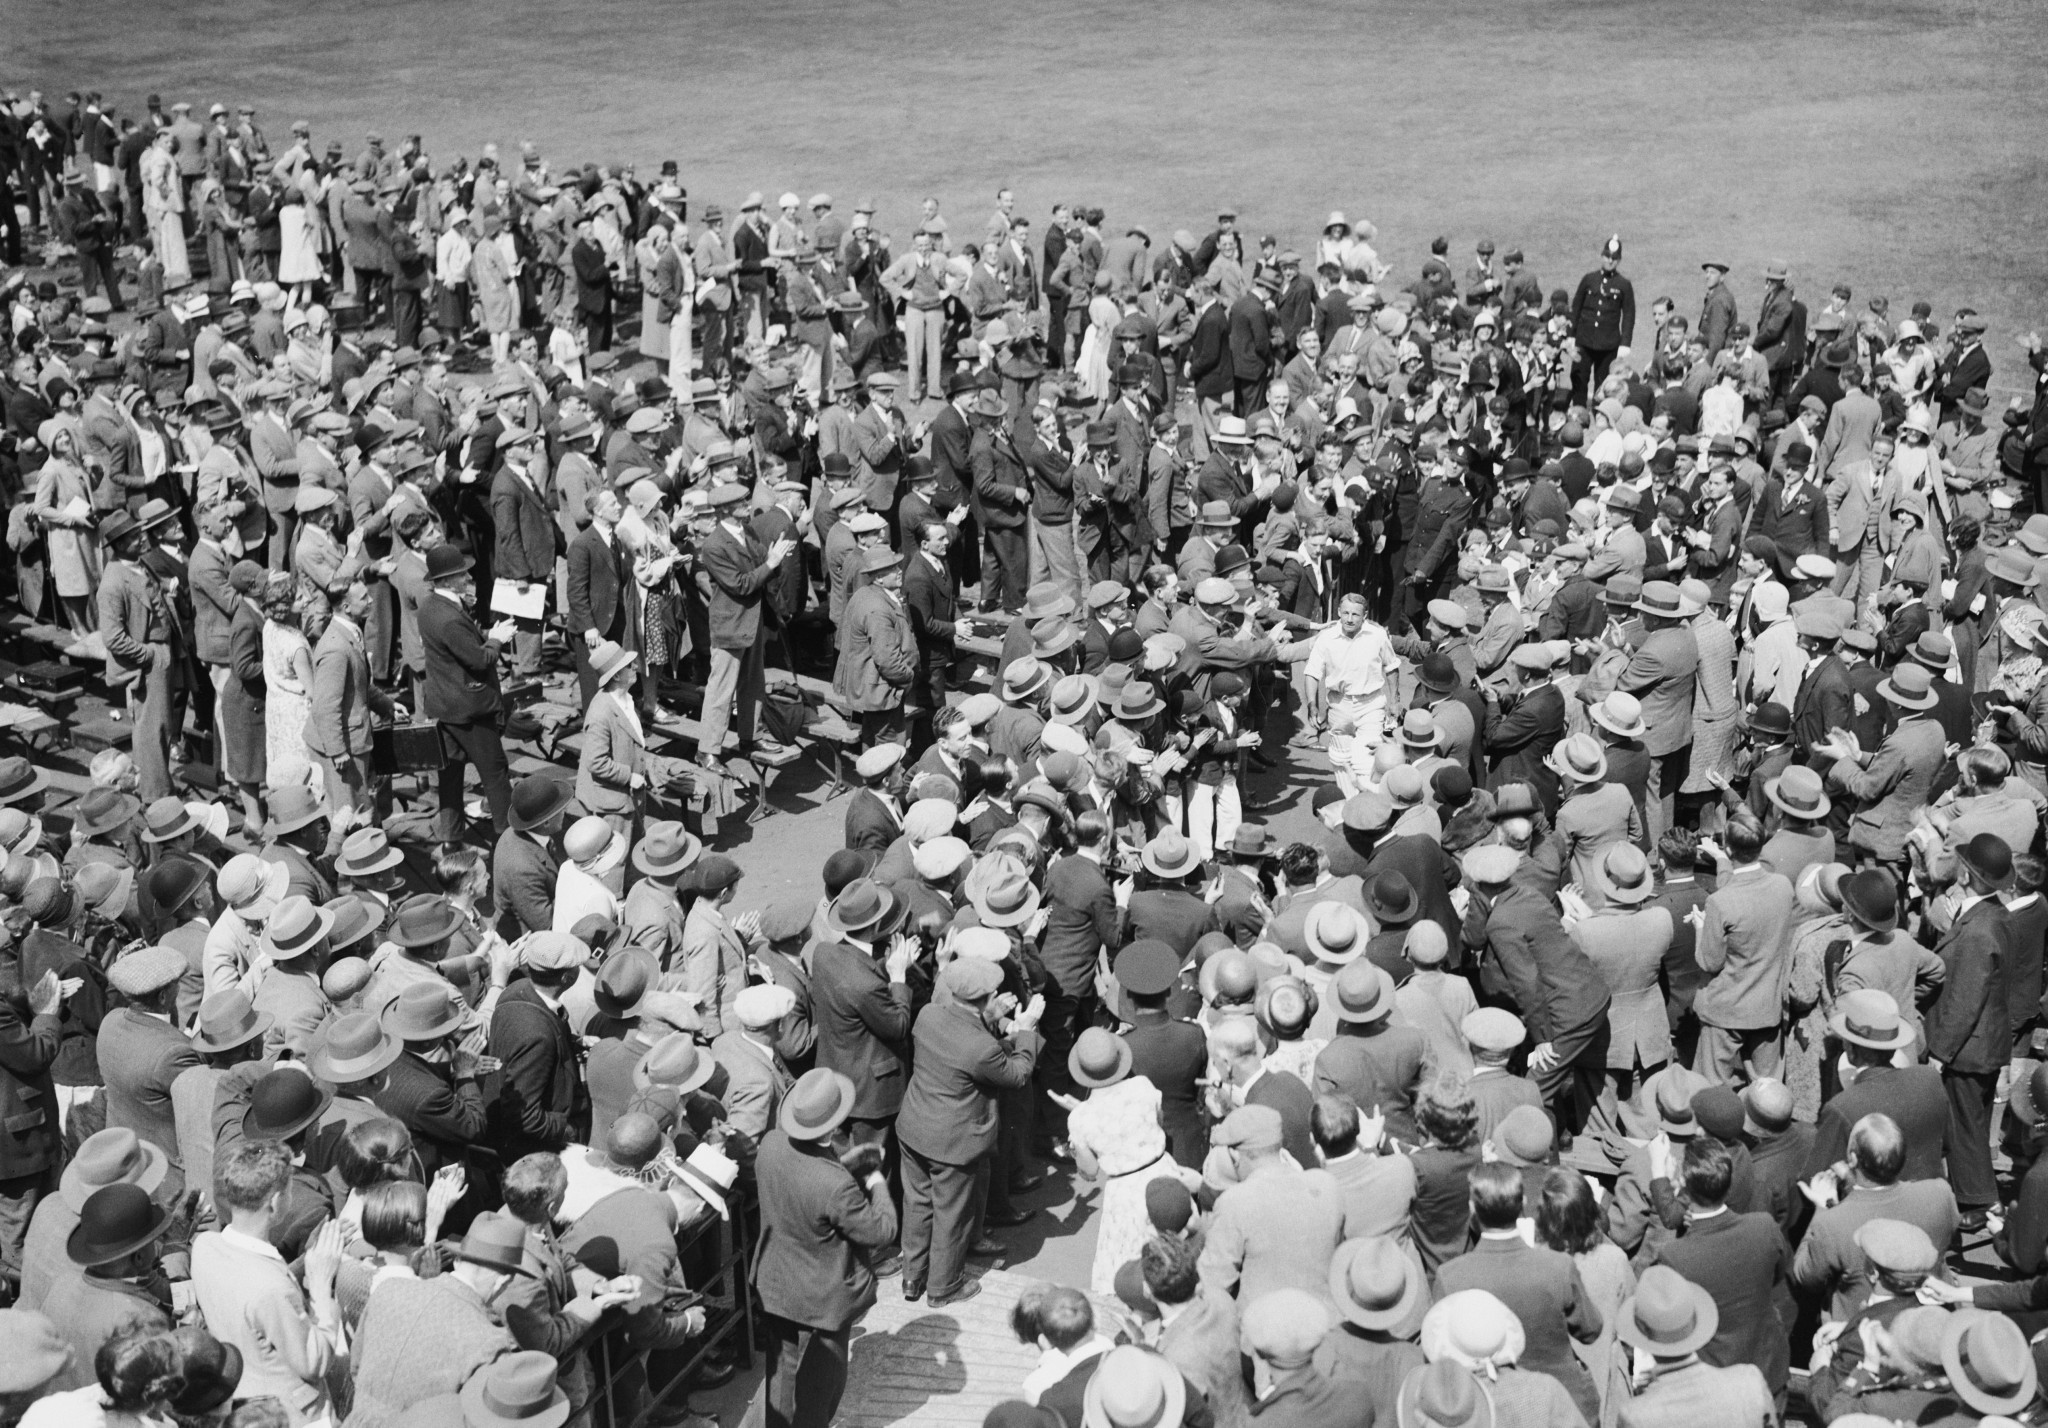 Crowds congratulate Donald Bradman after hitting a world record score of 334 against England at Headingley ©Getty Images/Hulton Archive